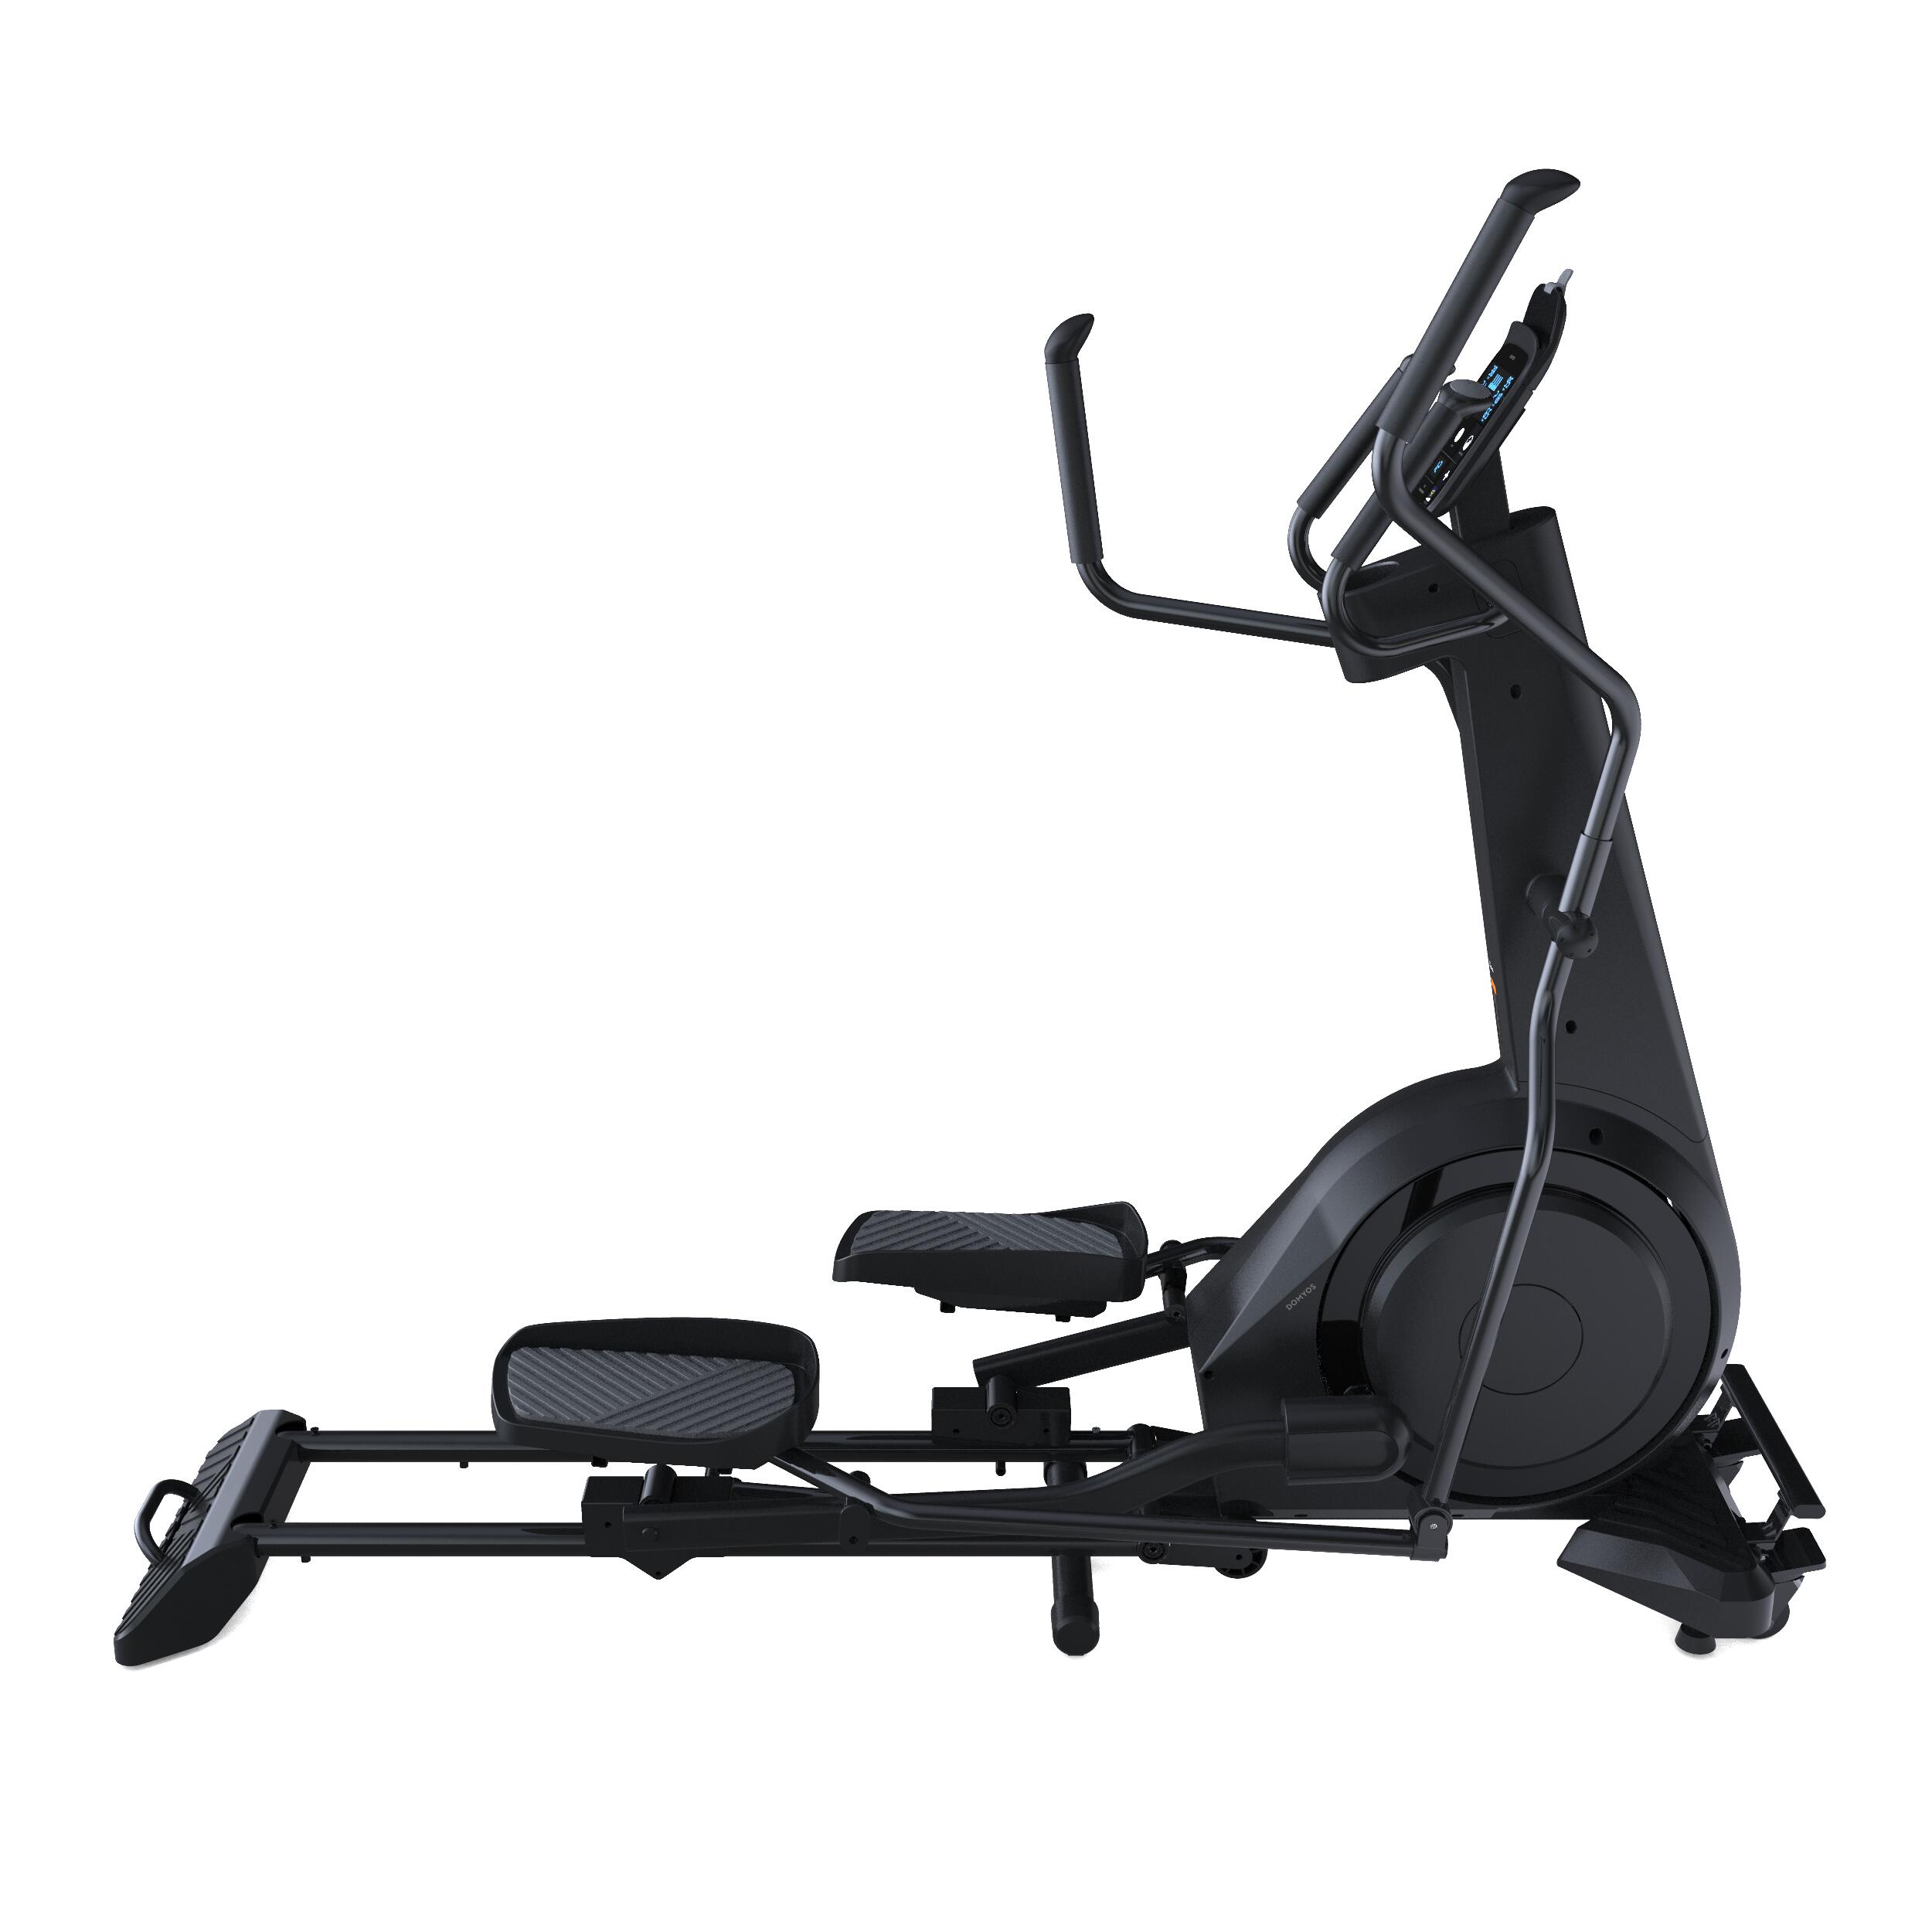 Front Wheel Folding Connected Self-Powered Cross Trainer Challenge Elliptical 5/6